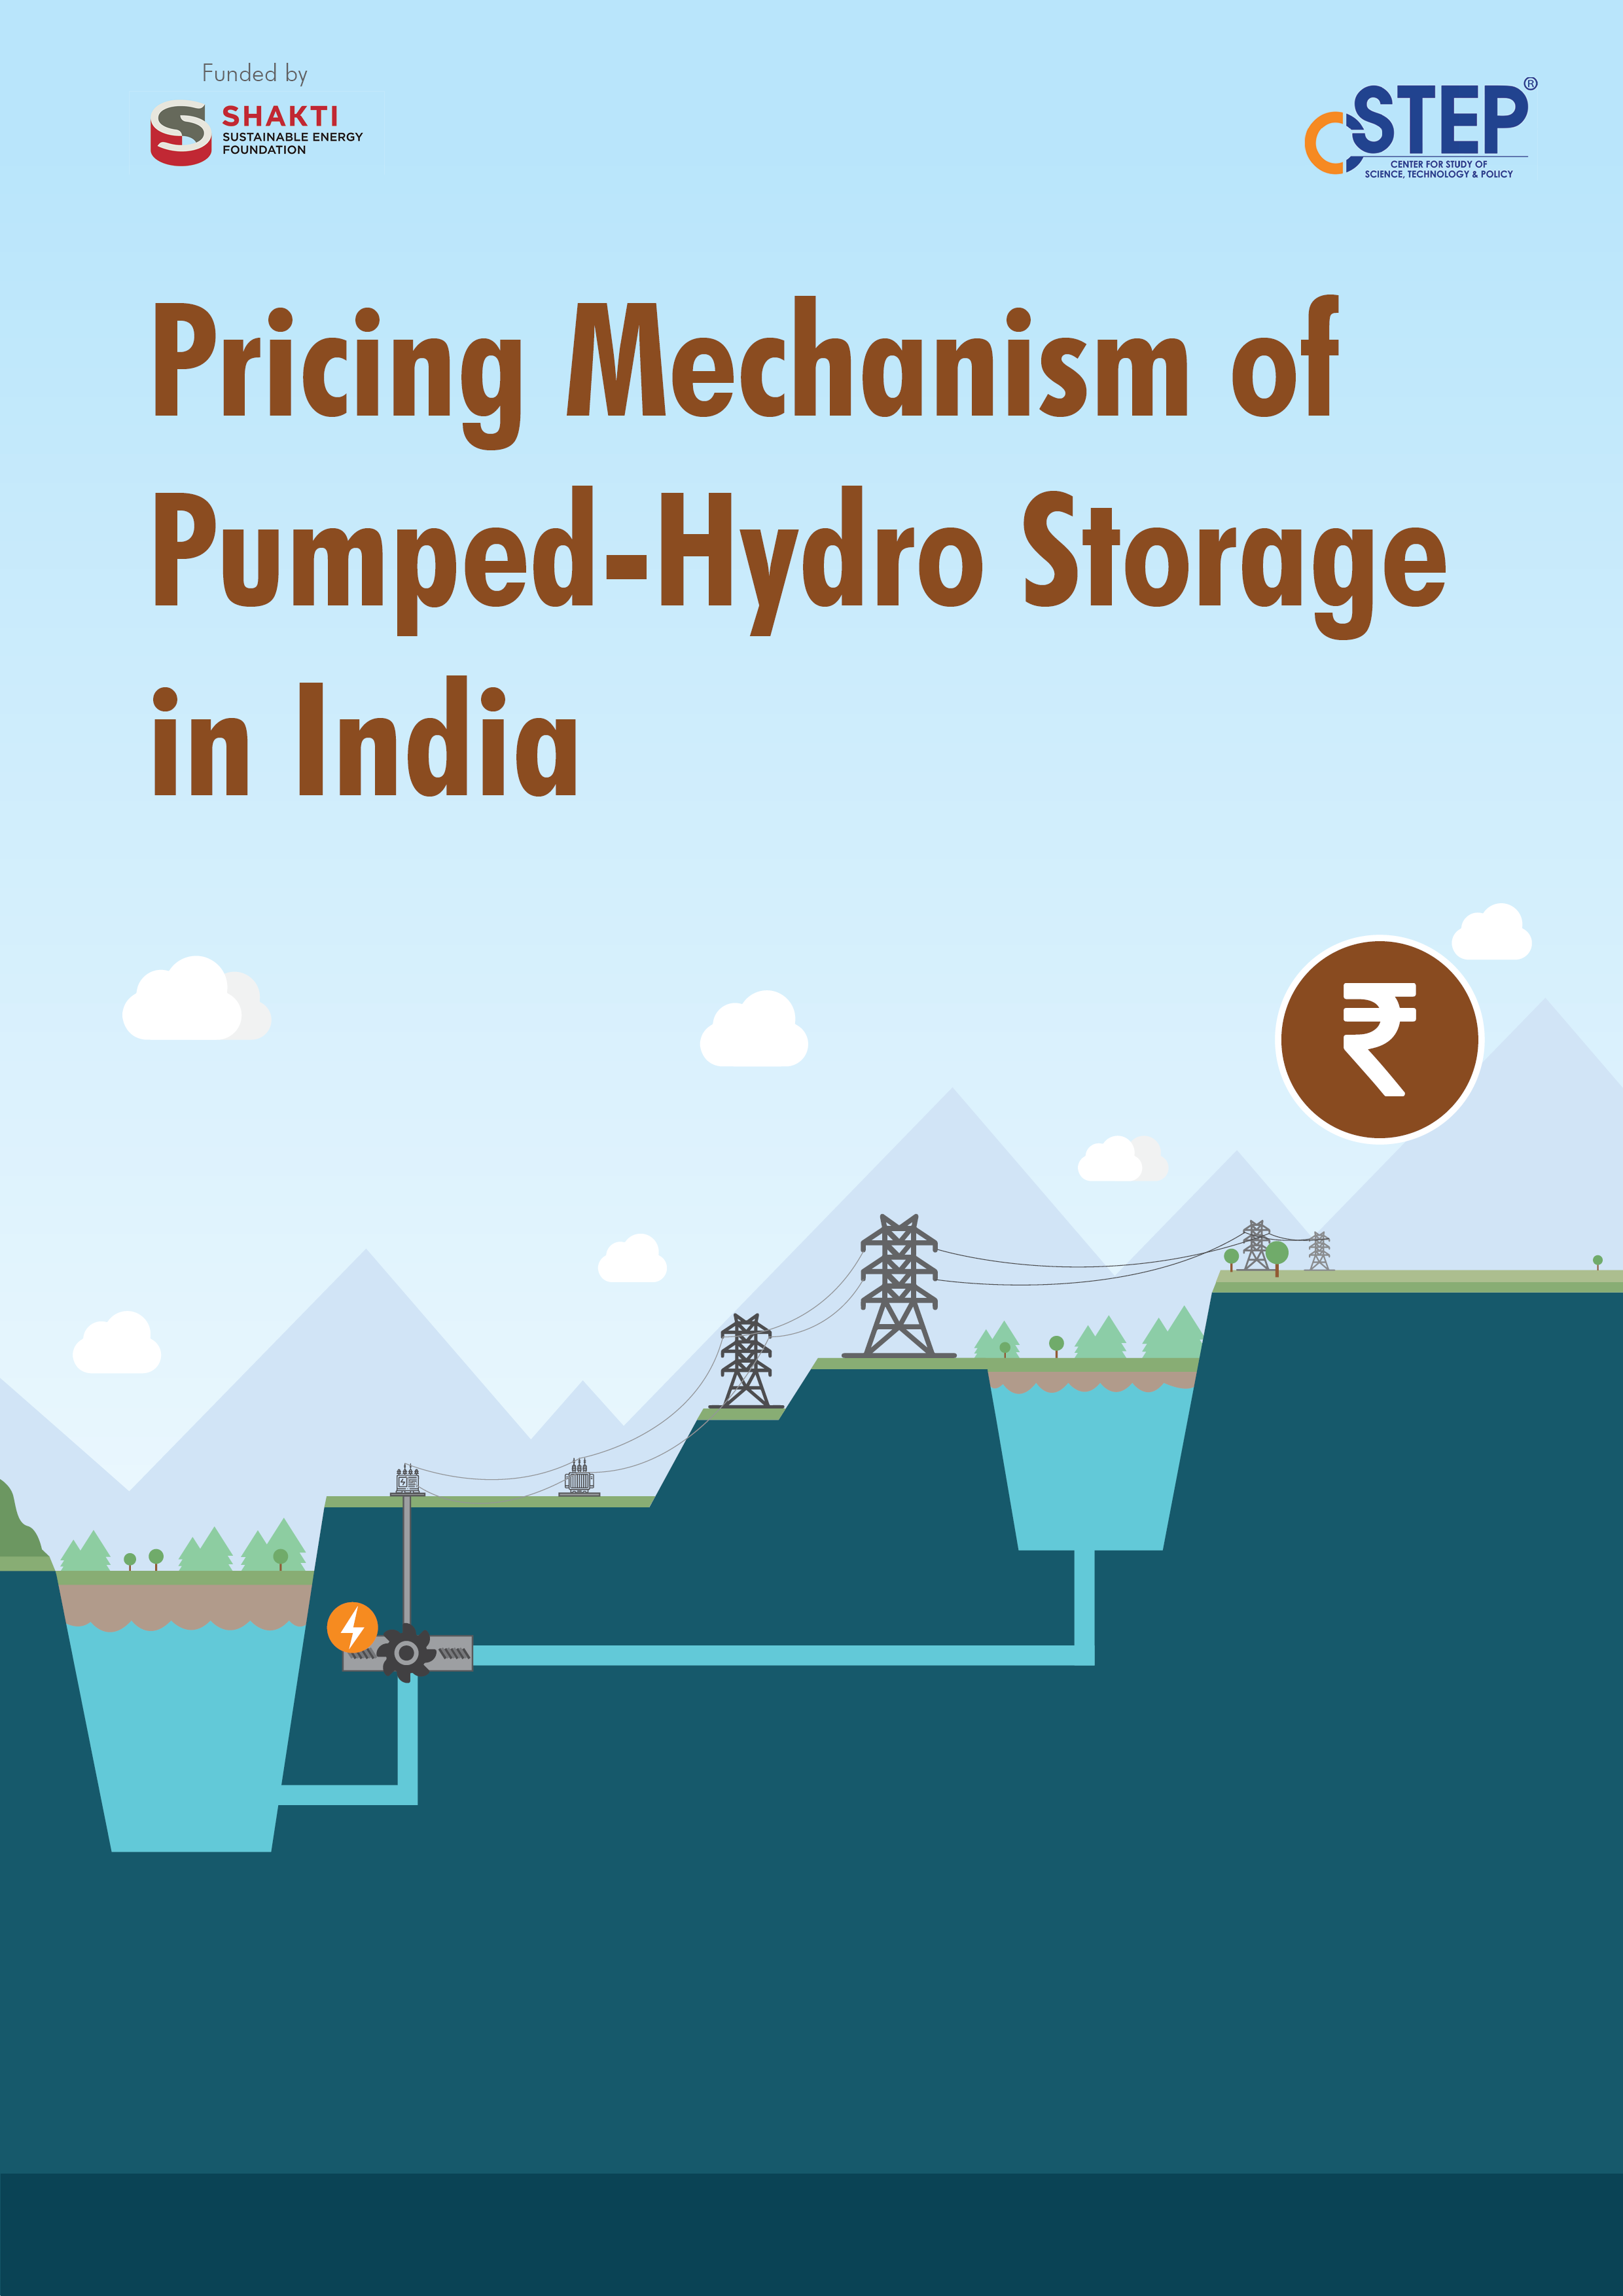 Pricing Mechanism of Pumped-Hydro Storage in India